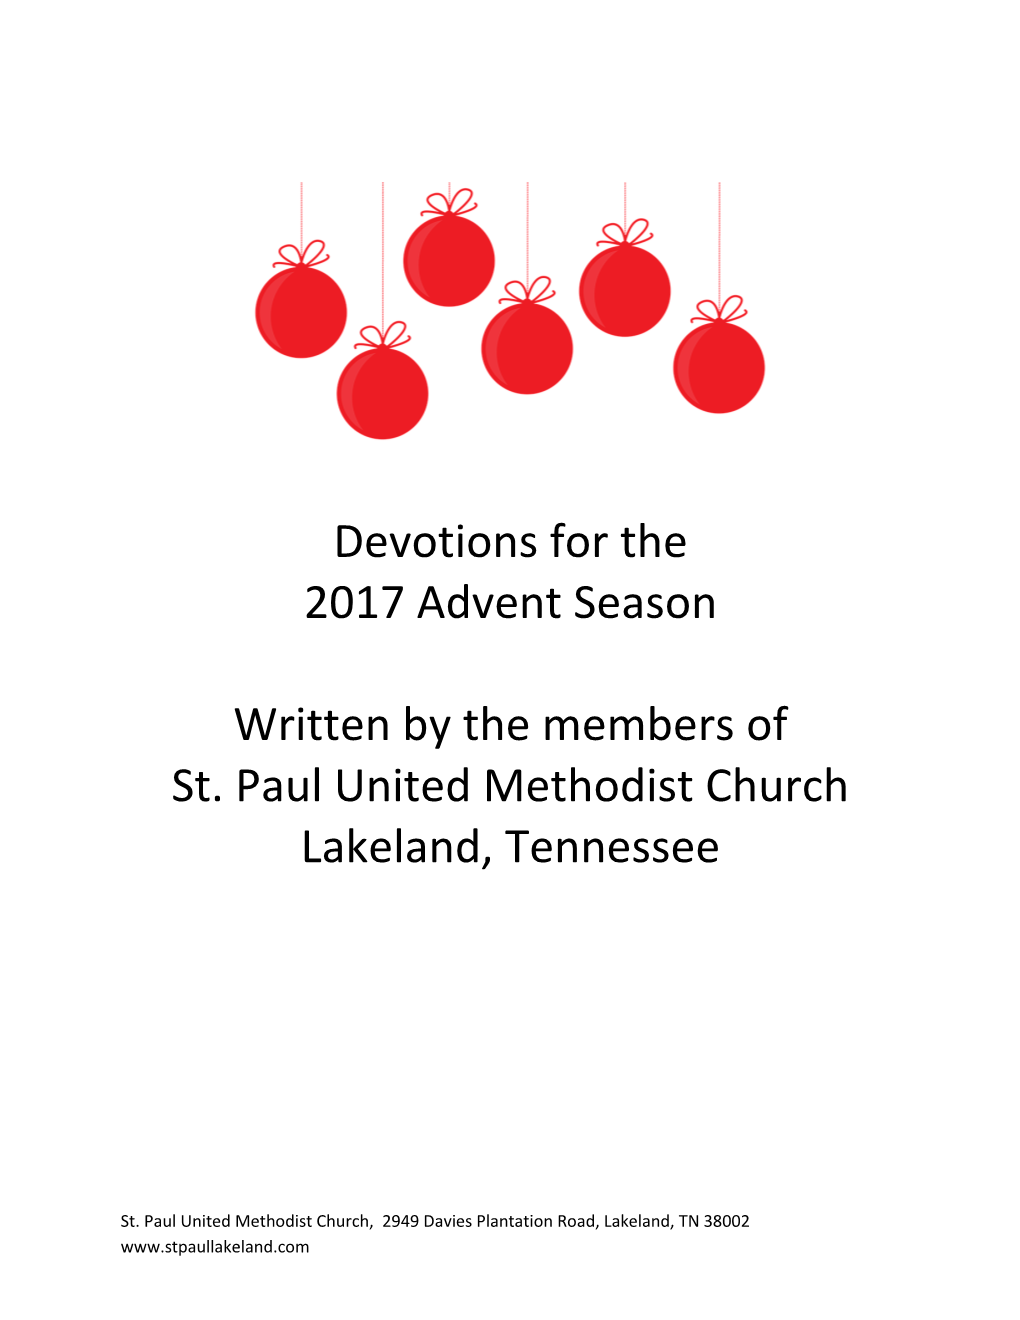 Devotions for the 2017 Advent Season Written by the Members of St. Paul